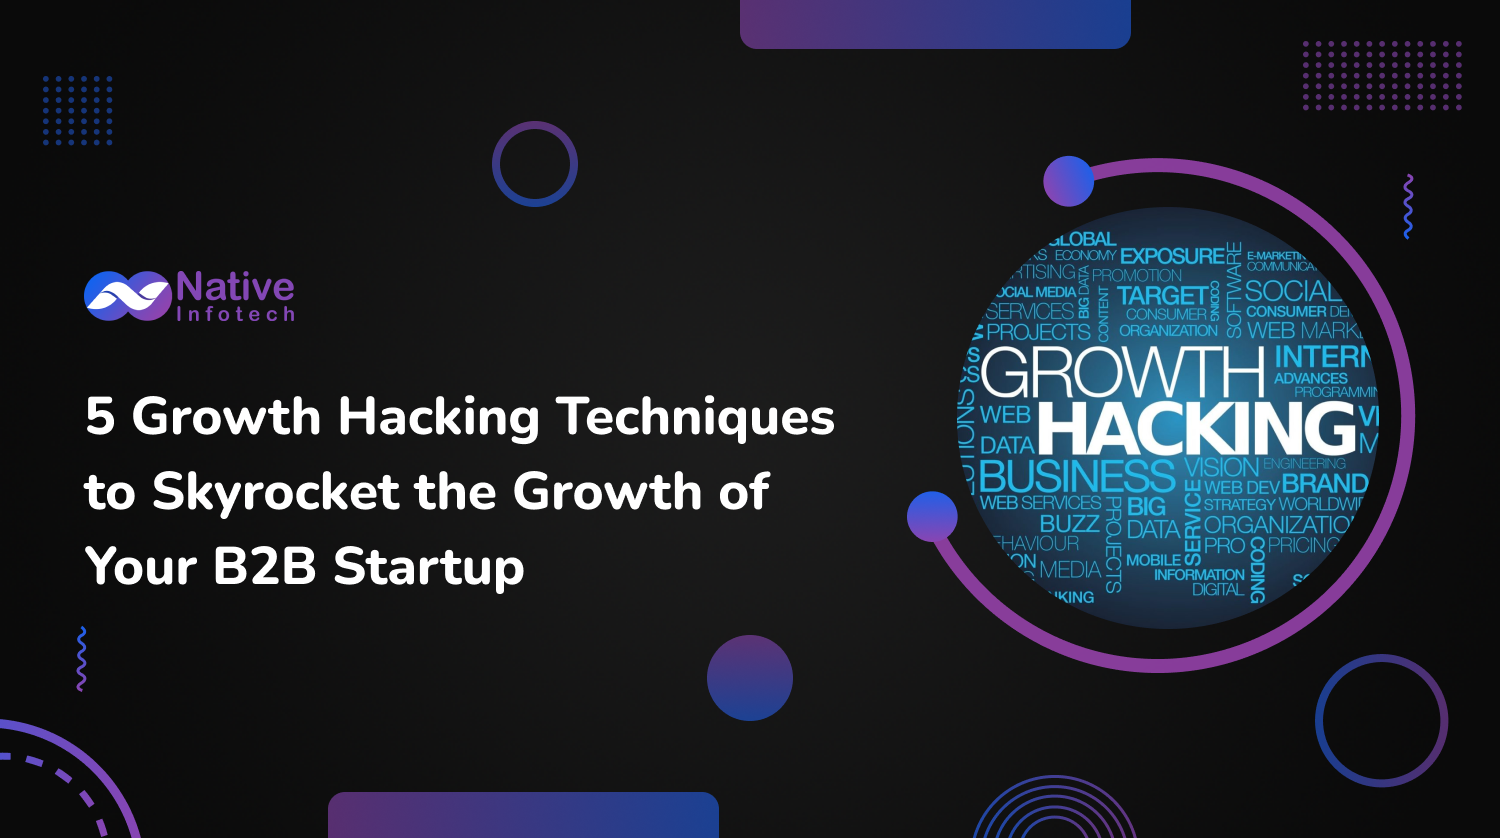 5 Growth Hacking Techniques to Skyrocket the Growth of Your B2B Startup | Native Infotech